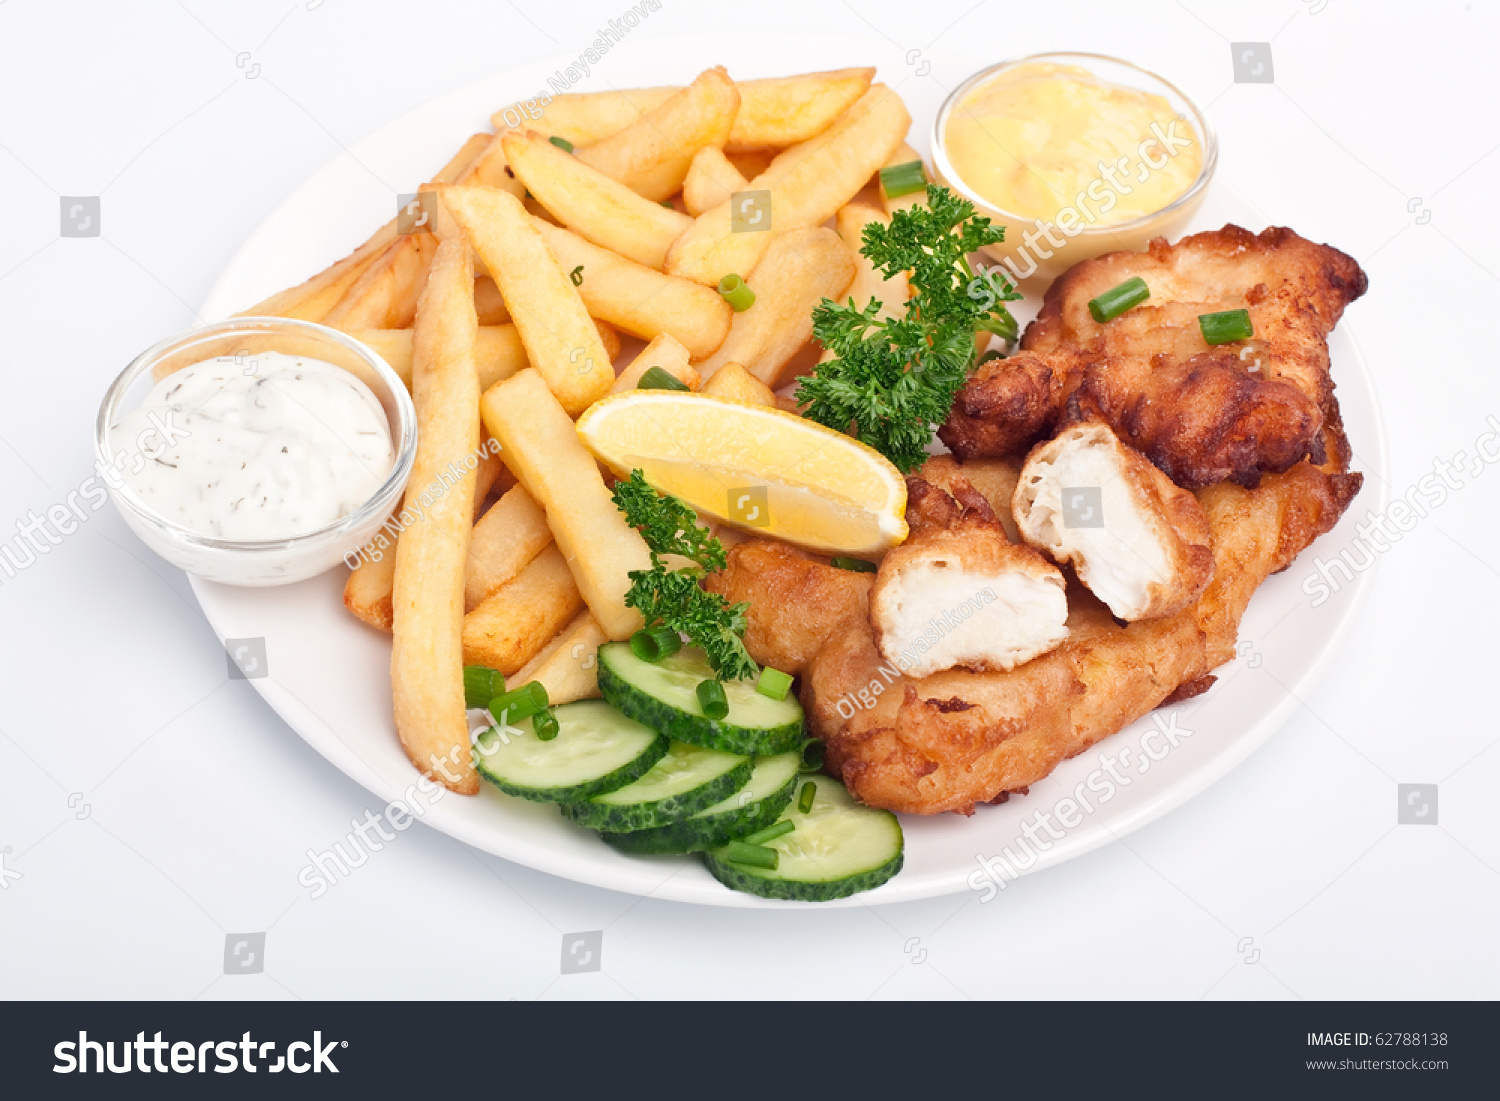 Serving Of Fish And Chips On White Background Stock Photo 62788138 ...